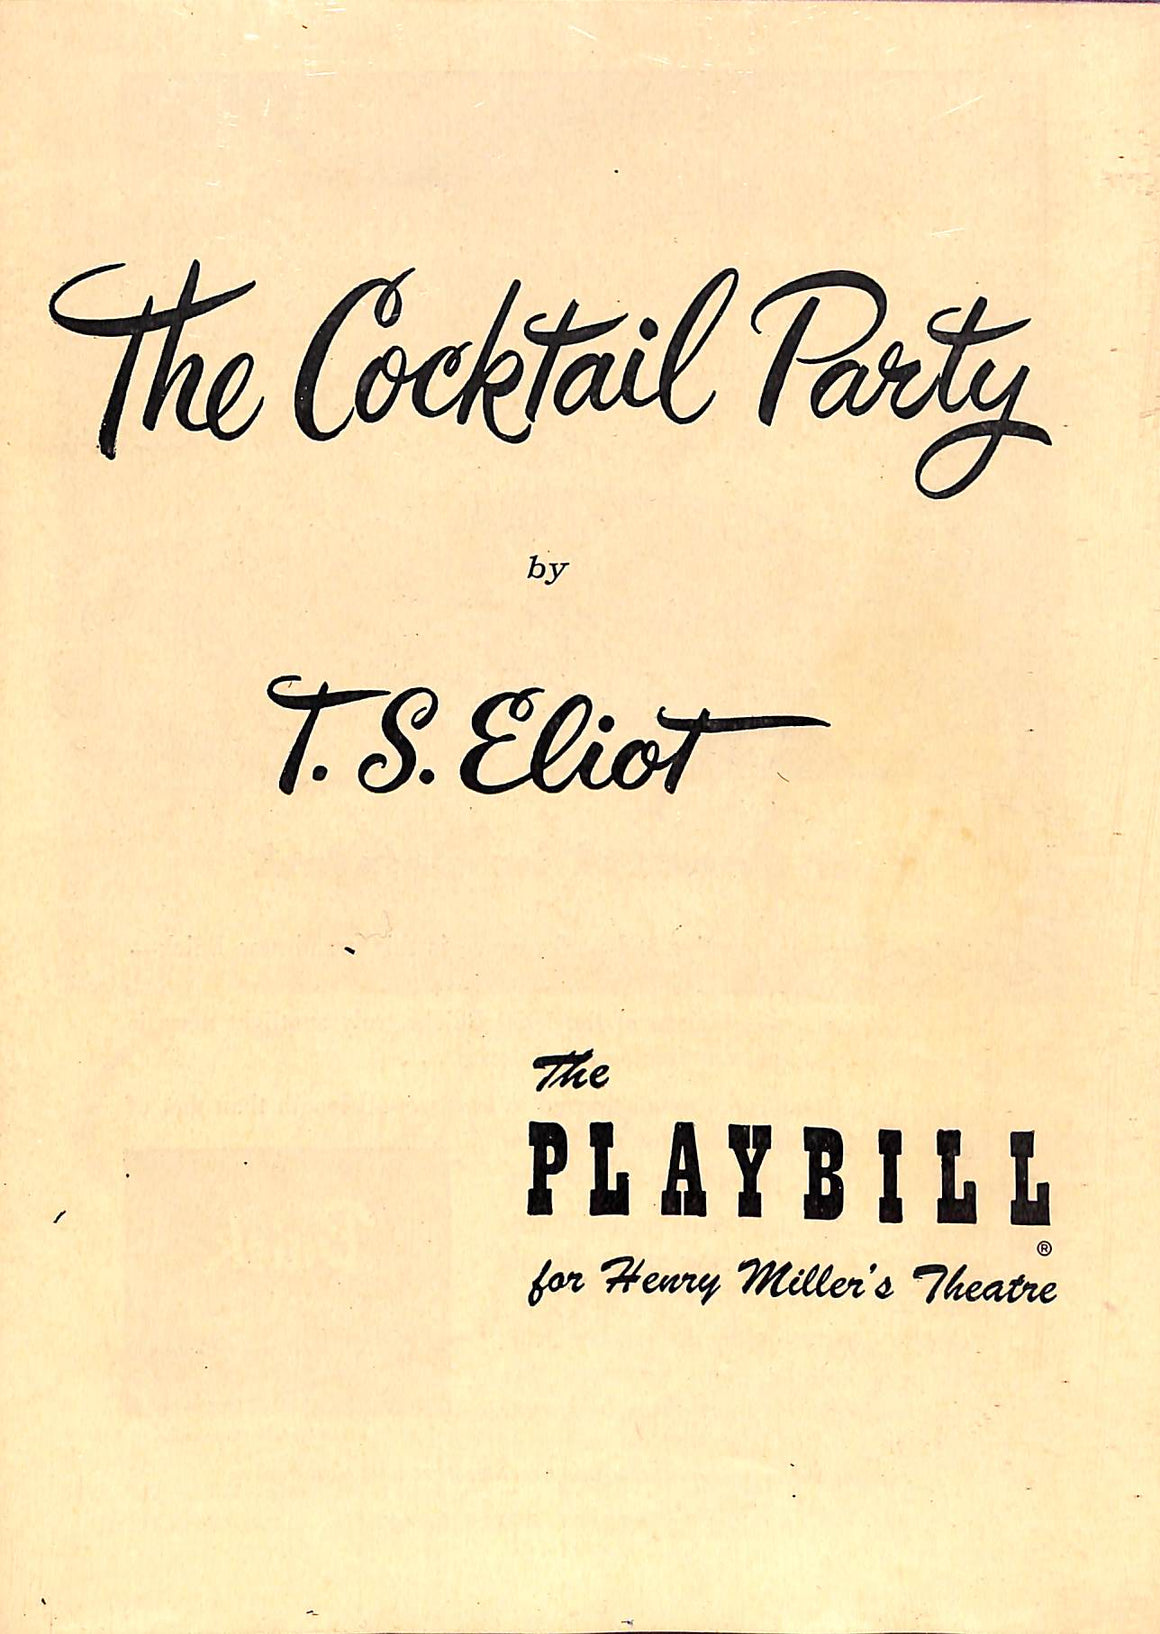 "The Cocktail Party" 1950 ELIOT, T.S.